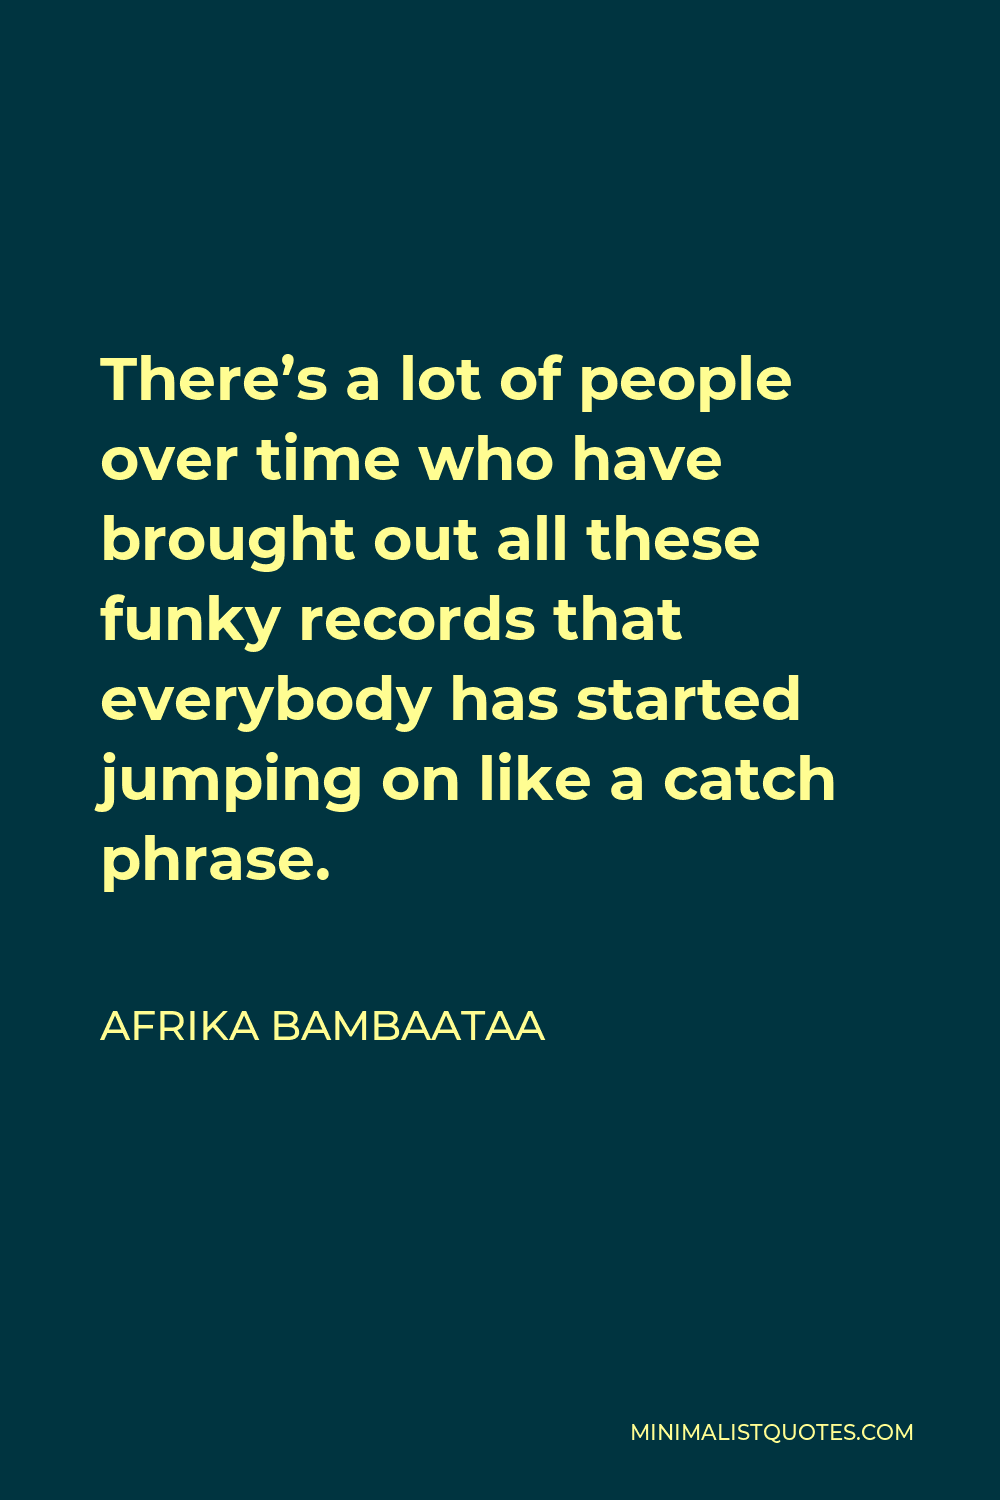 Afrika Bambaataa Quote - There’s a lot of people over time who have brought out all these funky records that everybody has started jumping on like a catch phrase.